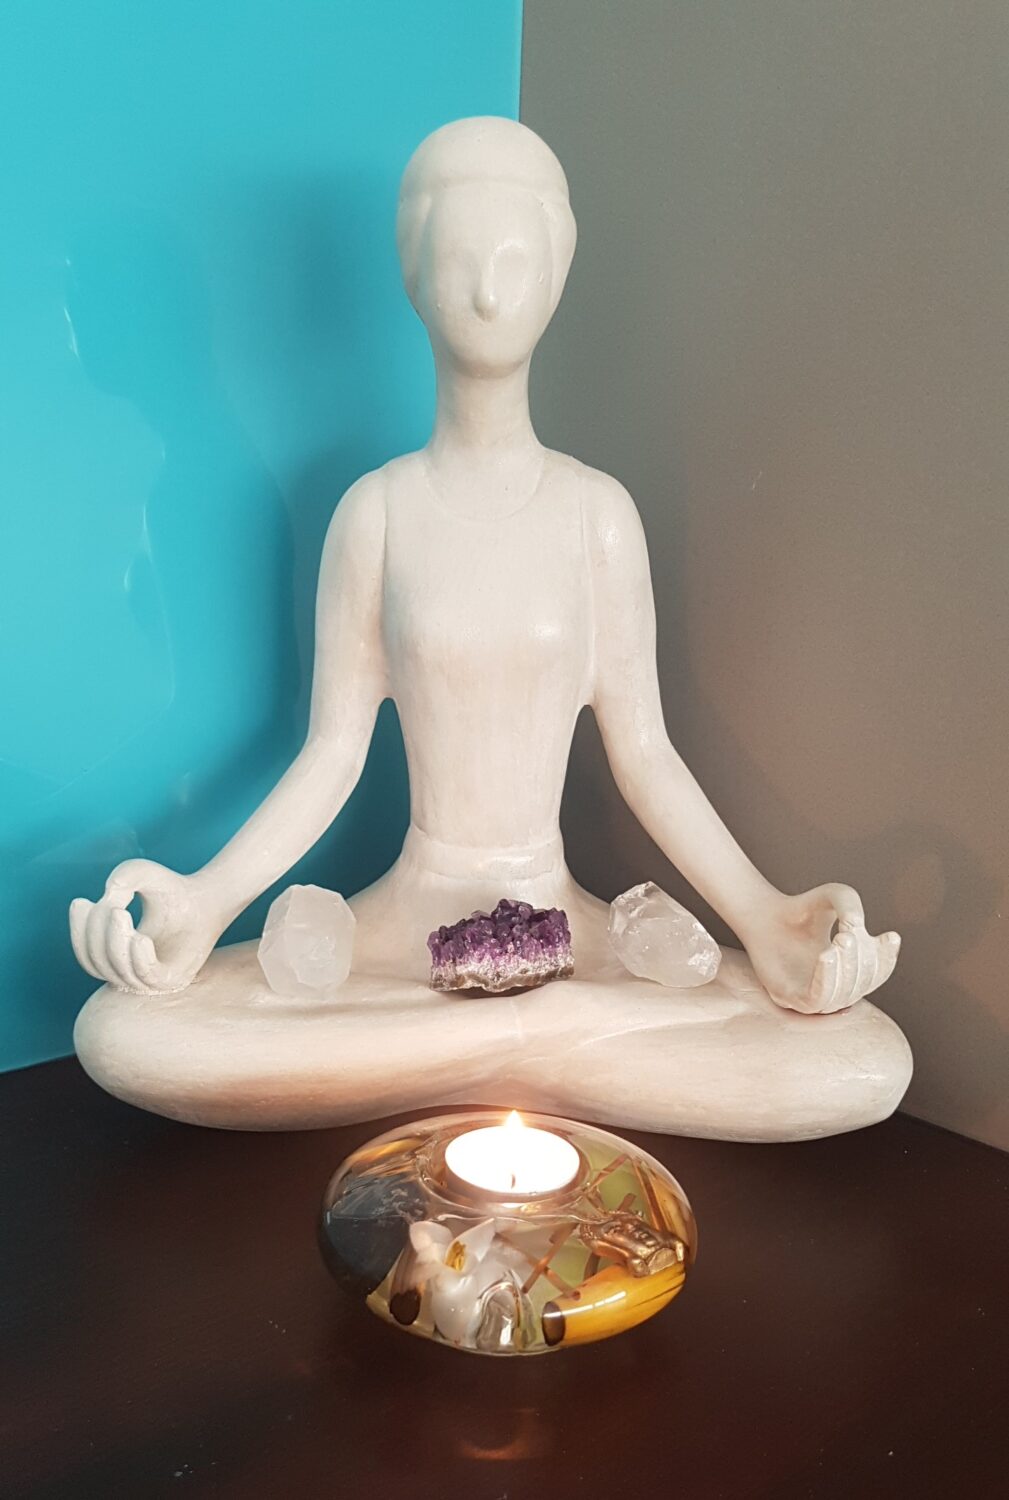 Meditation statue with candle